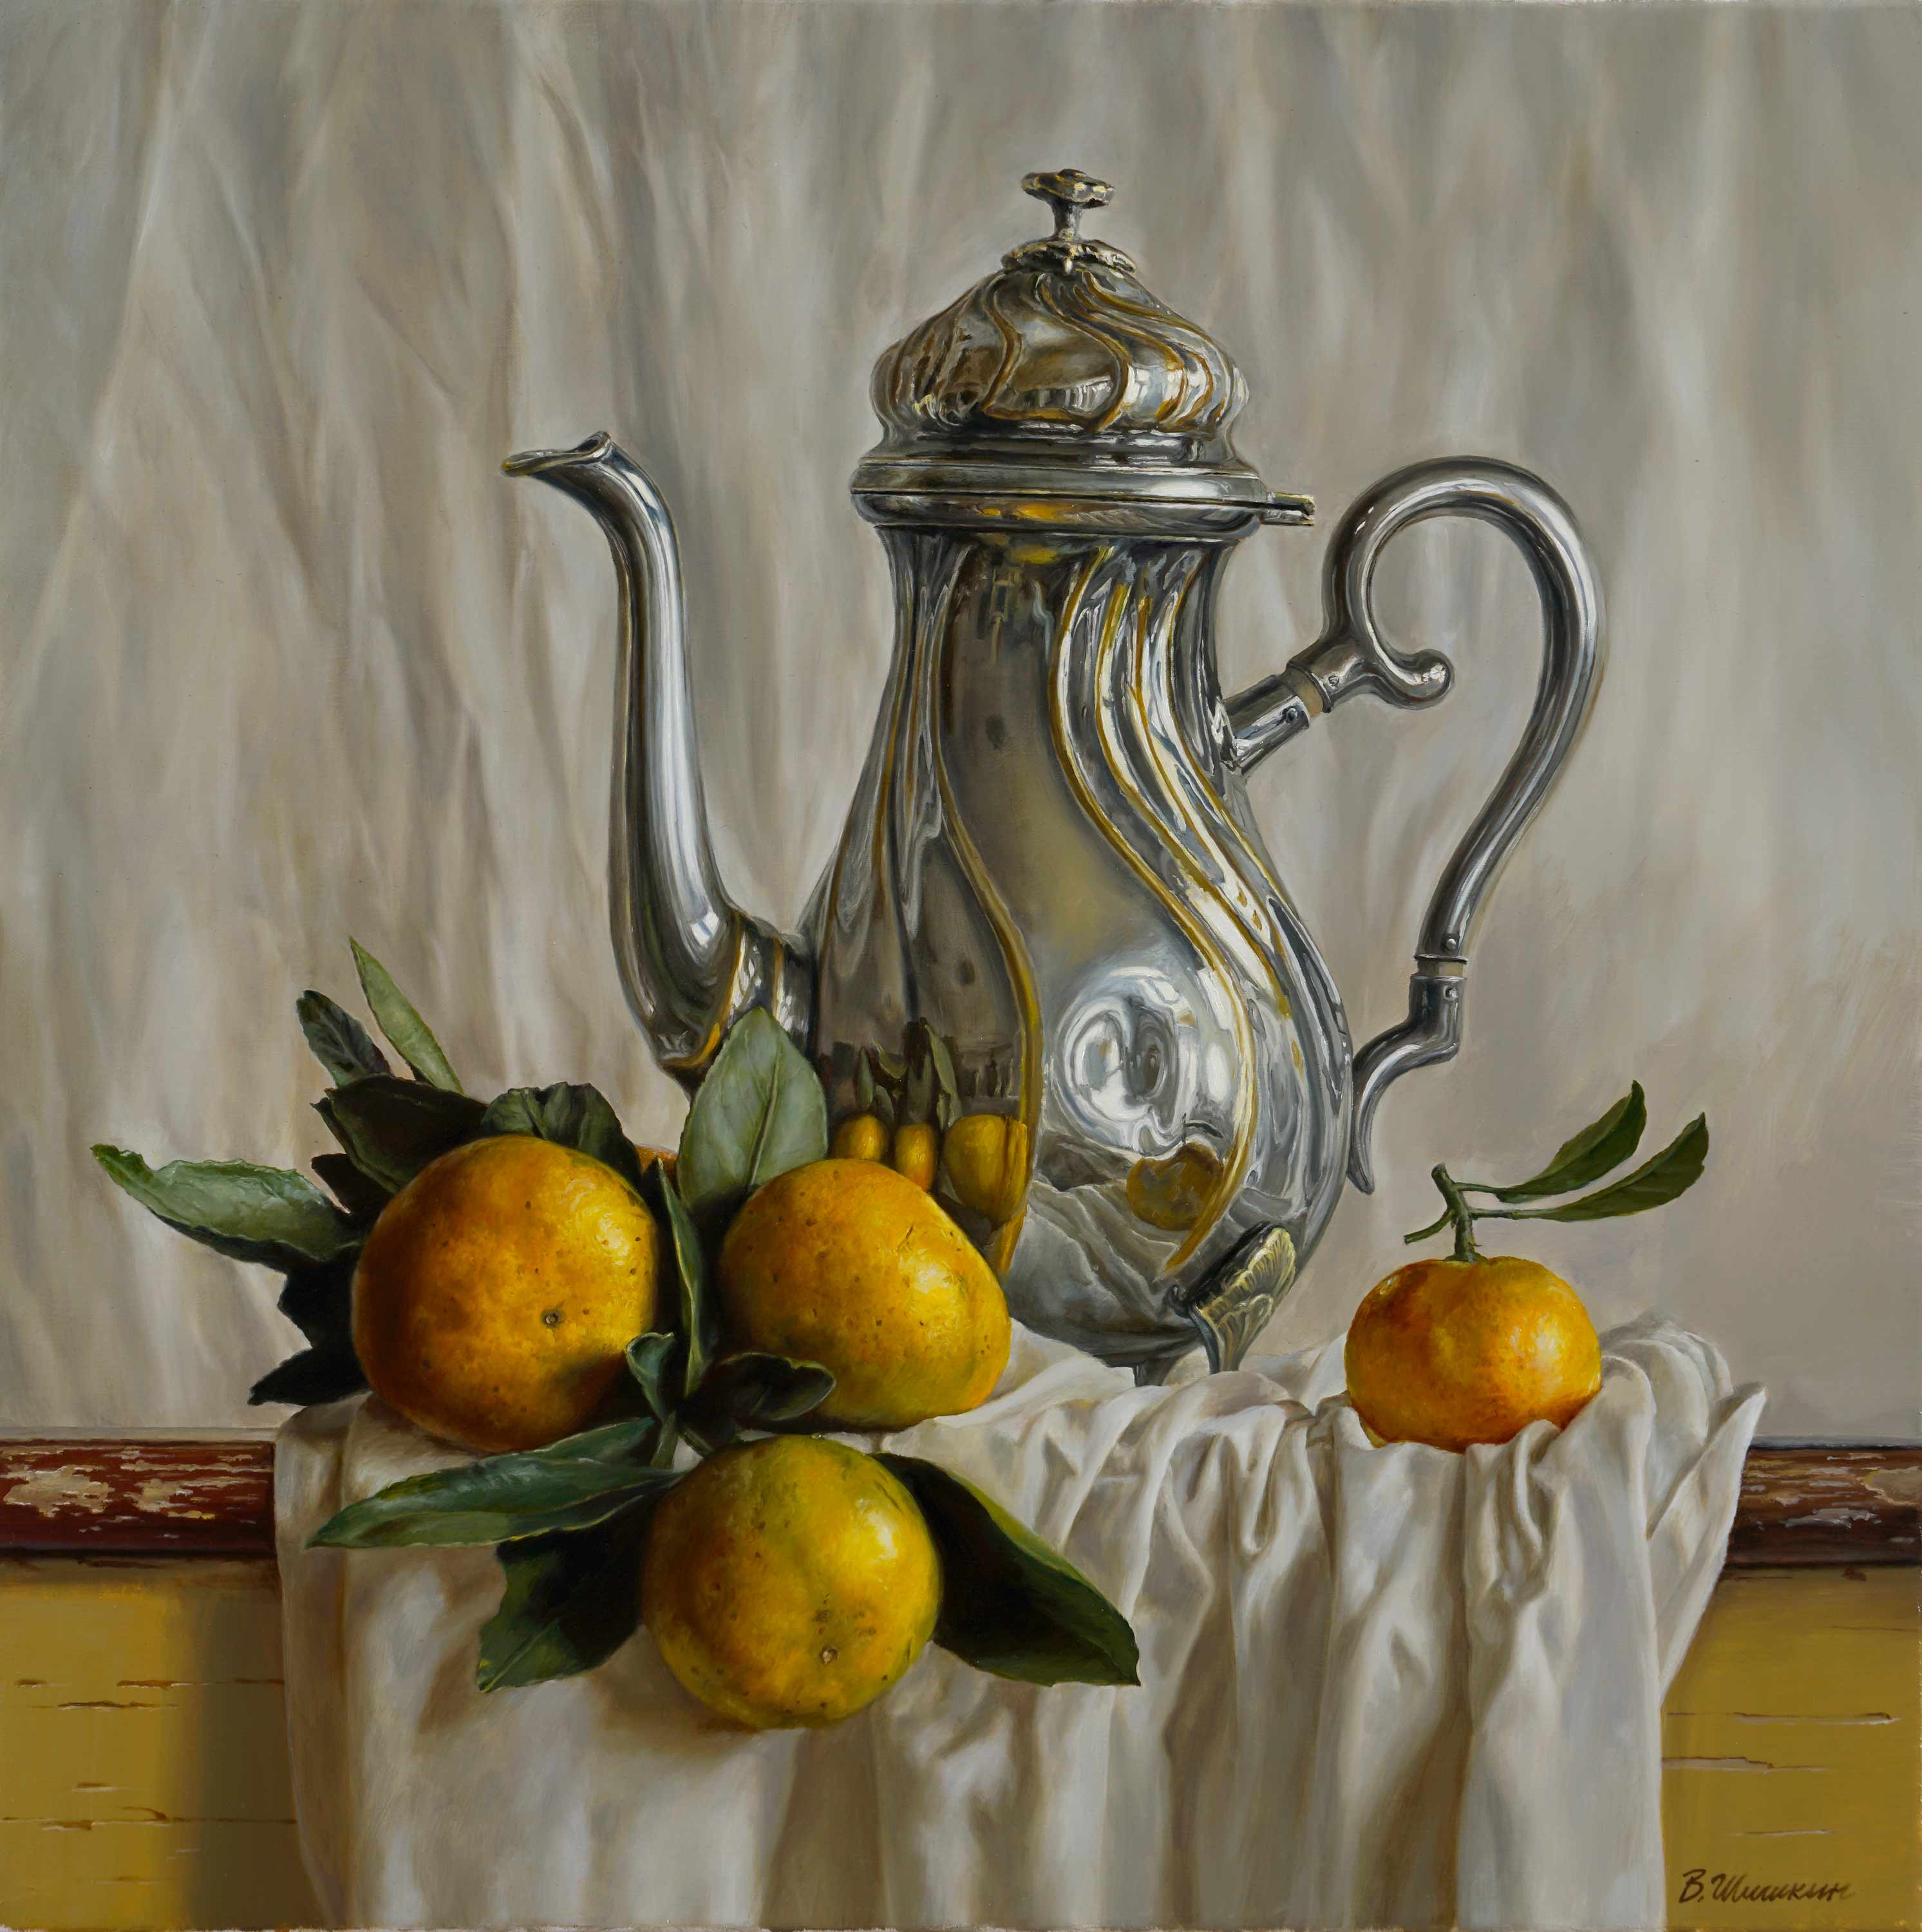 Kettle with tangerines - 1, Valery Shishkin, Buy the painting Oil